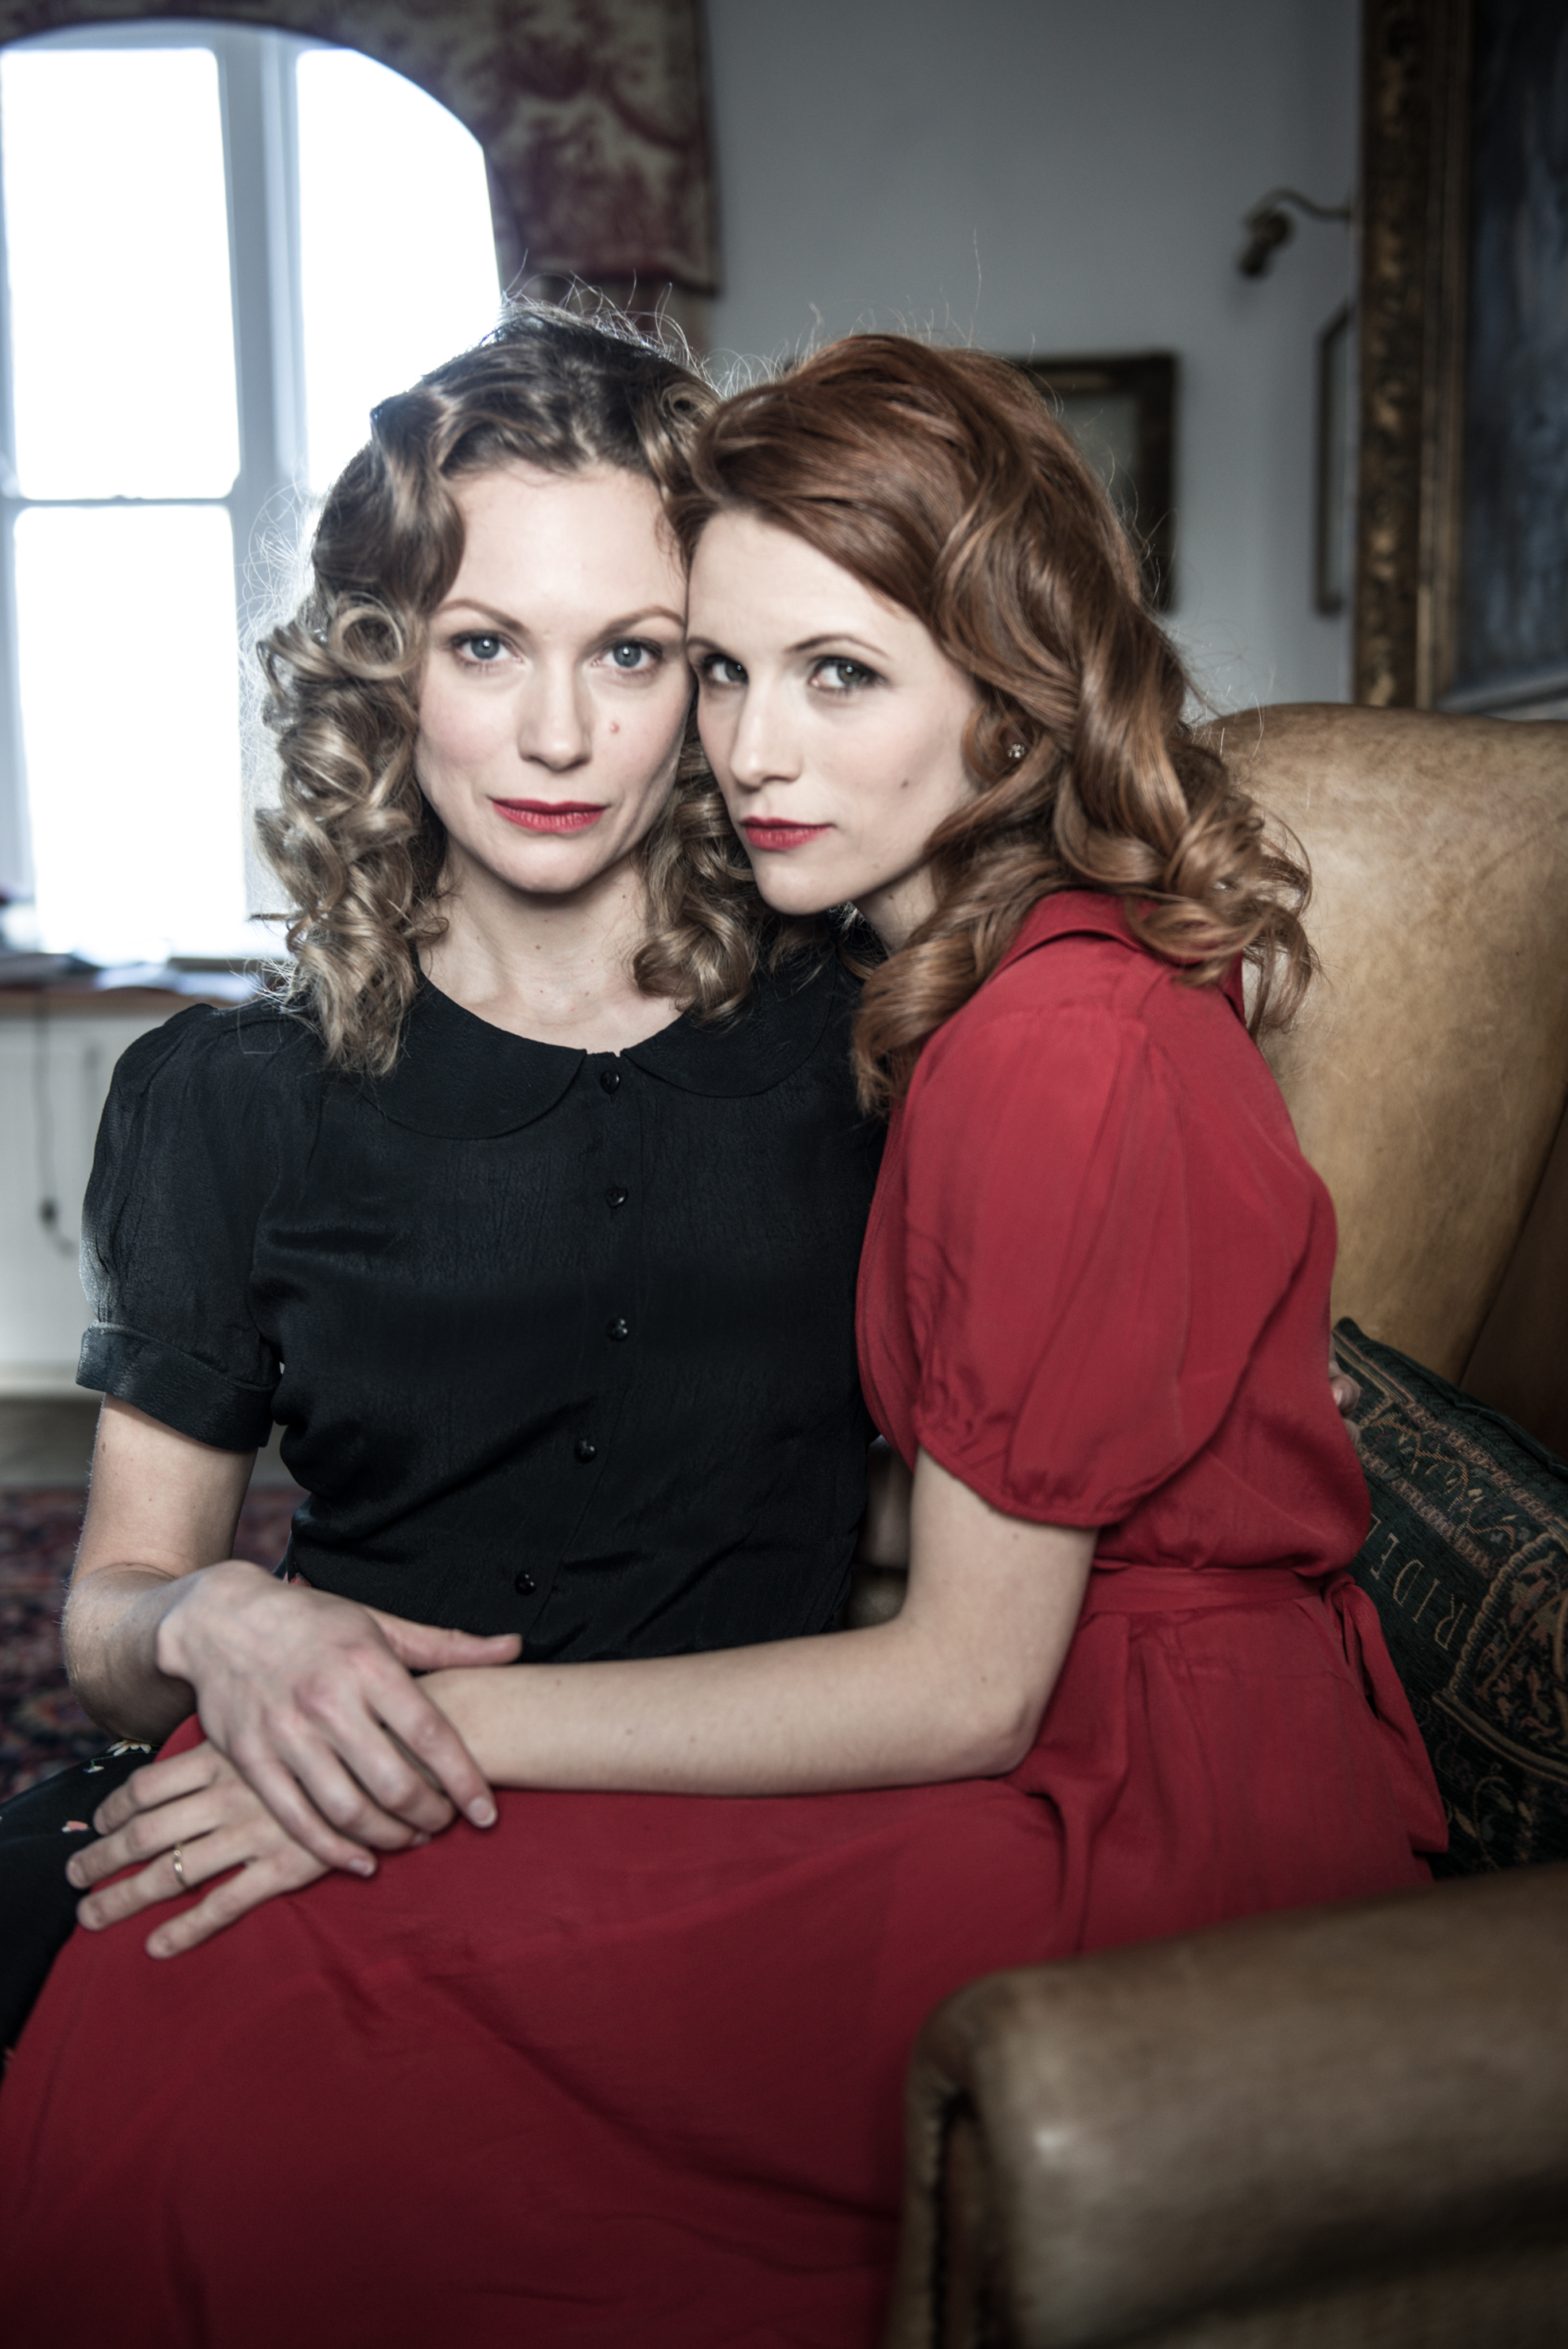 Charlotte Hunter and Victoria Broom in Life in Colors